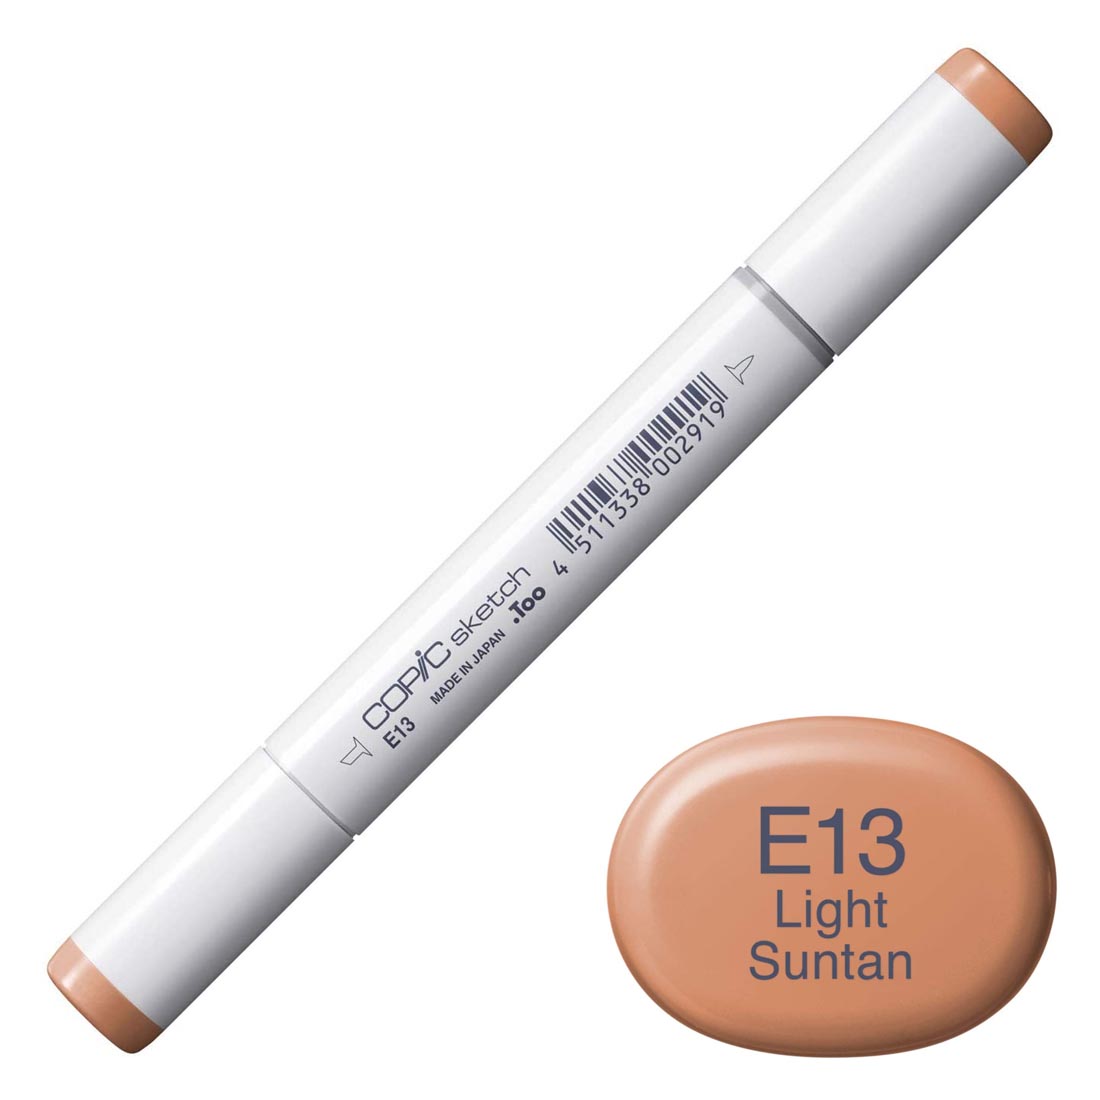 COPIC Sketch Marker with a color swatch and text of E13 Light Suntan